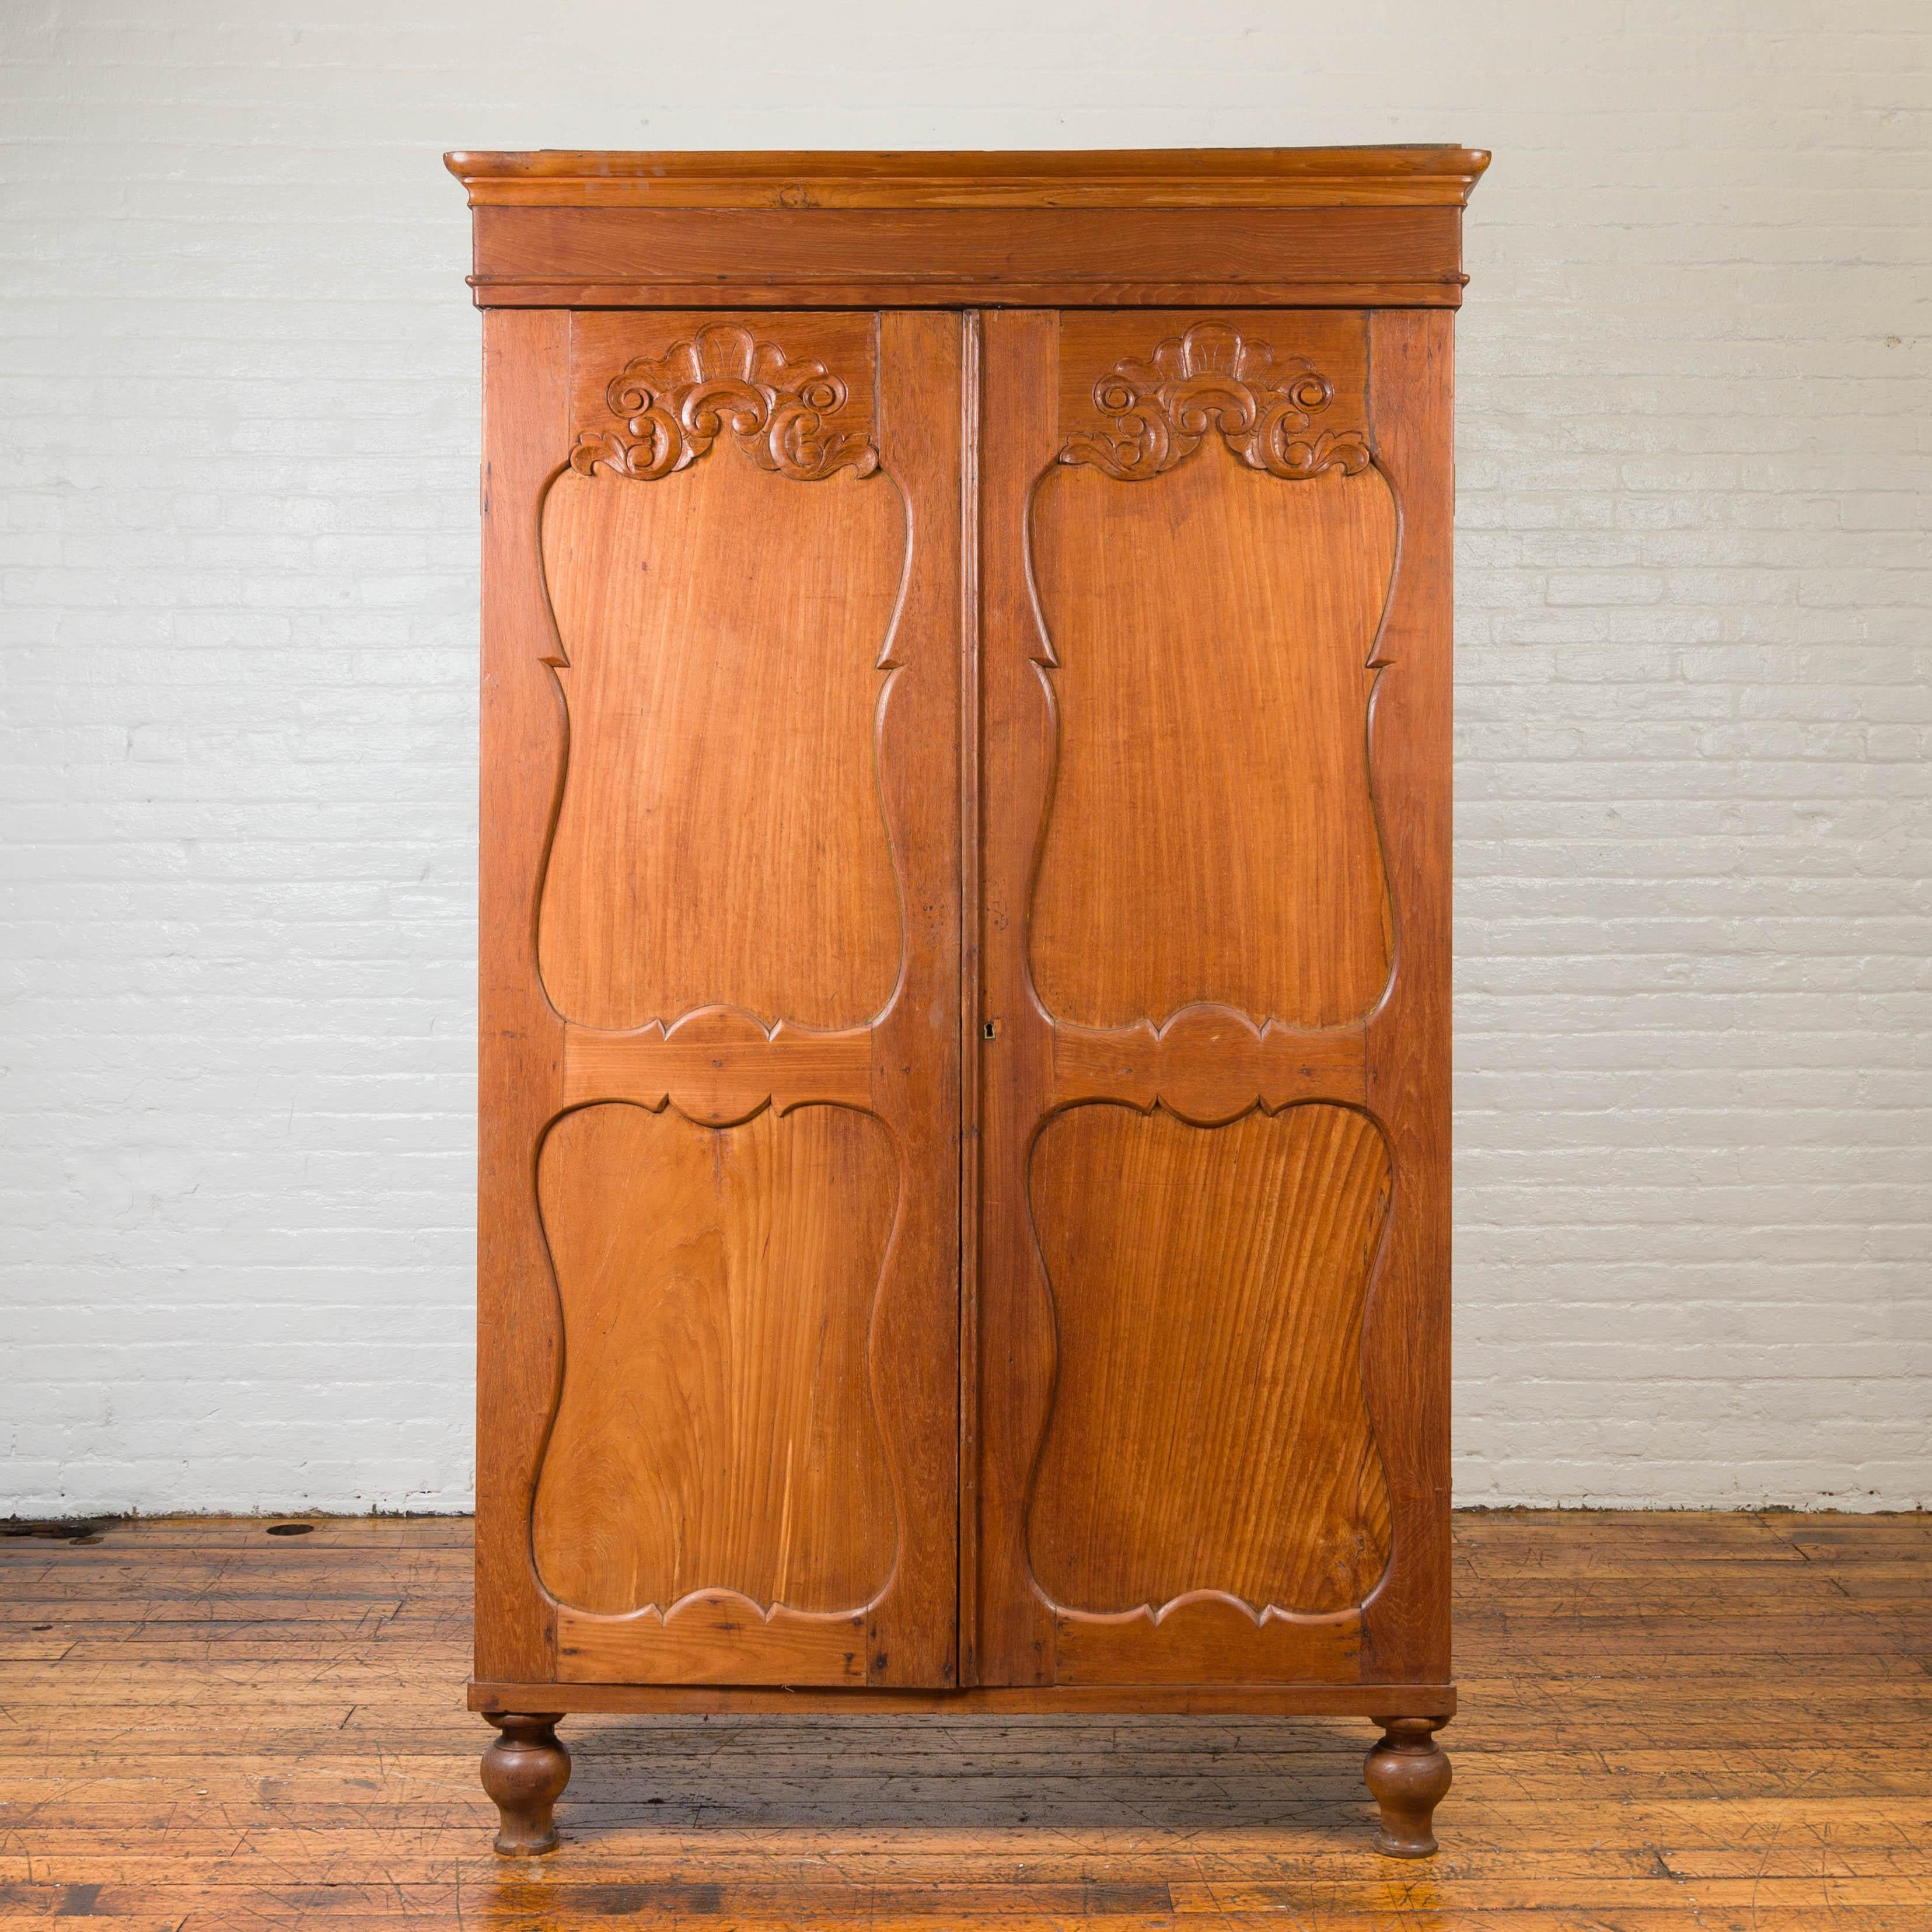 A 19th century Dutch Colonial teak cabinet with carved panels and inner shelves. Born in Indonesia during the 19th century, this tall teak cabinet features a beveled cornice sitting above two large doors, adorned with recessed panels topped with